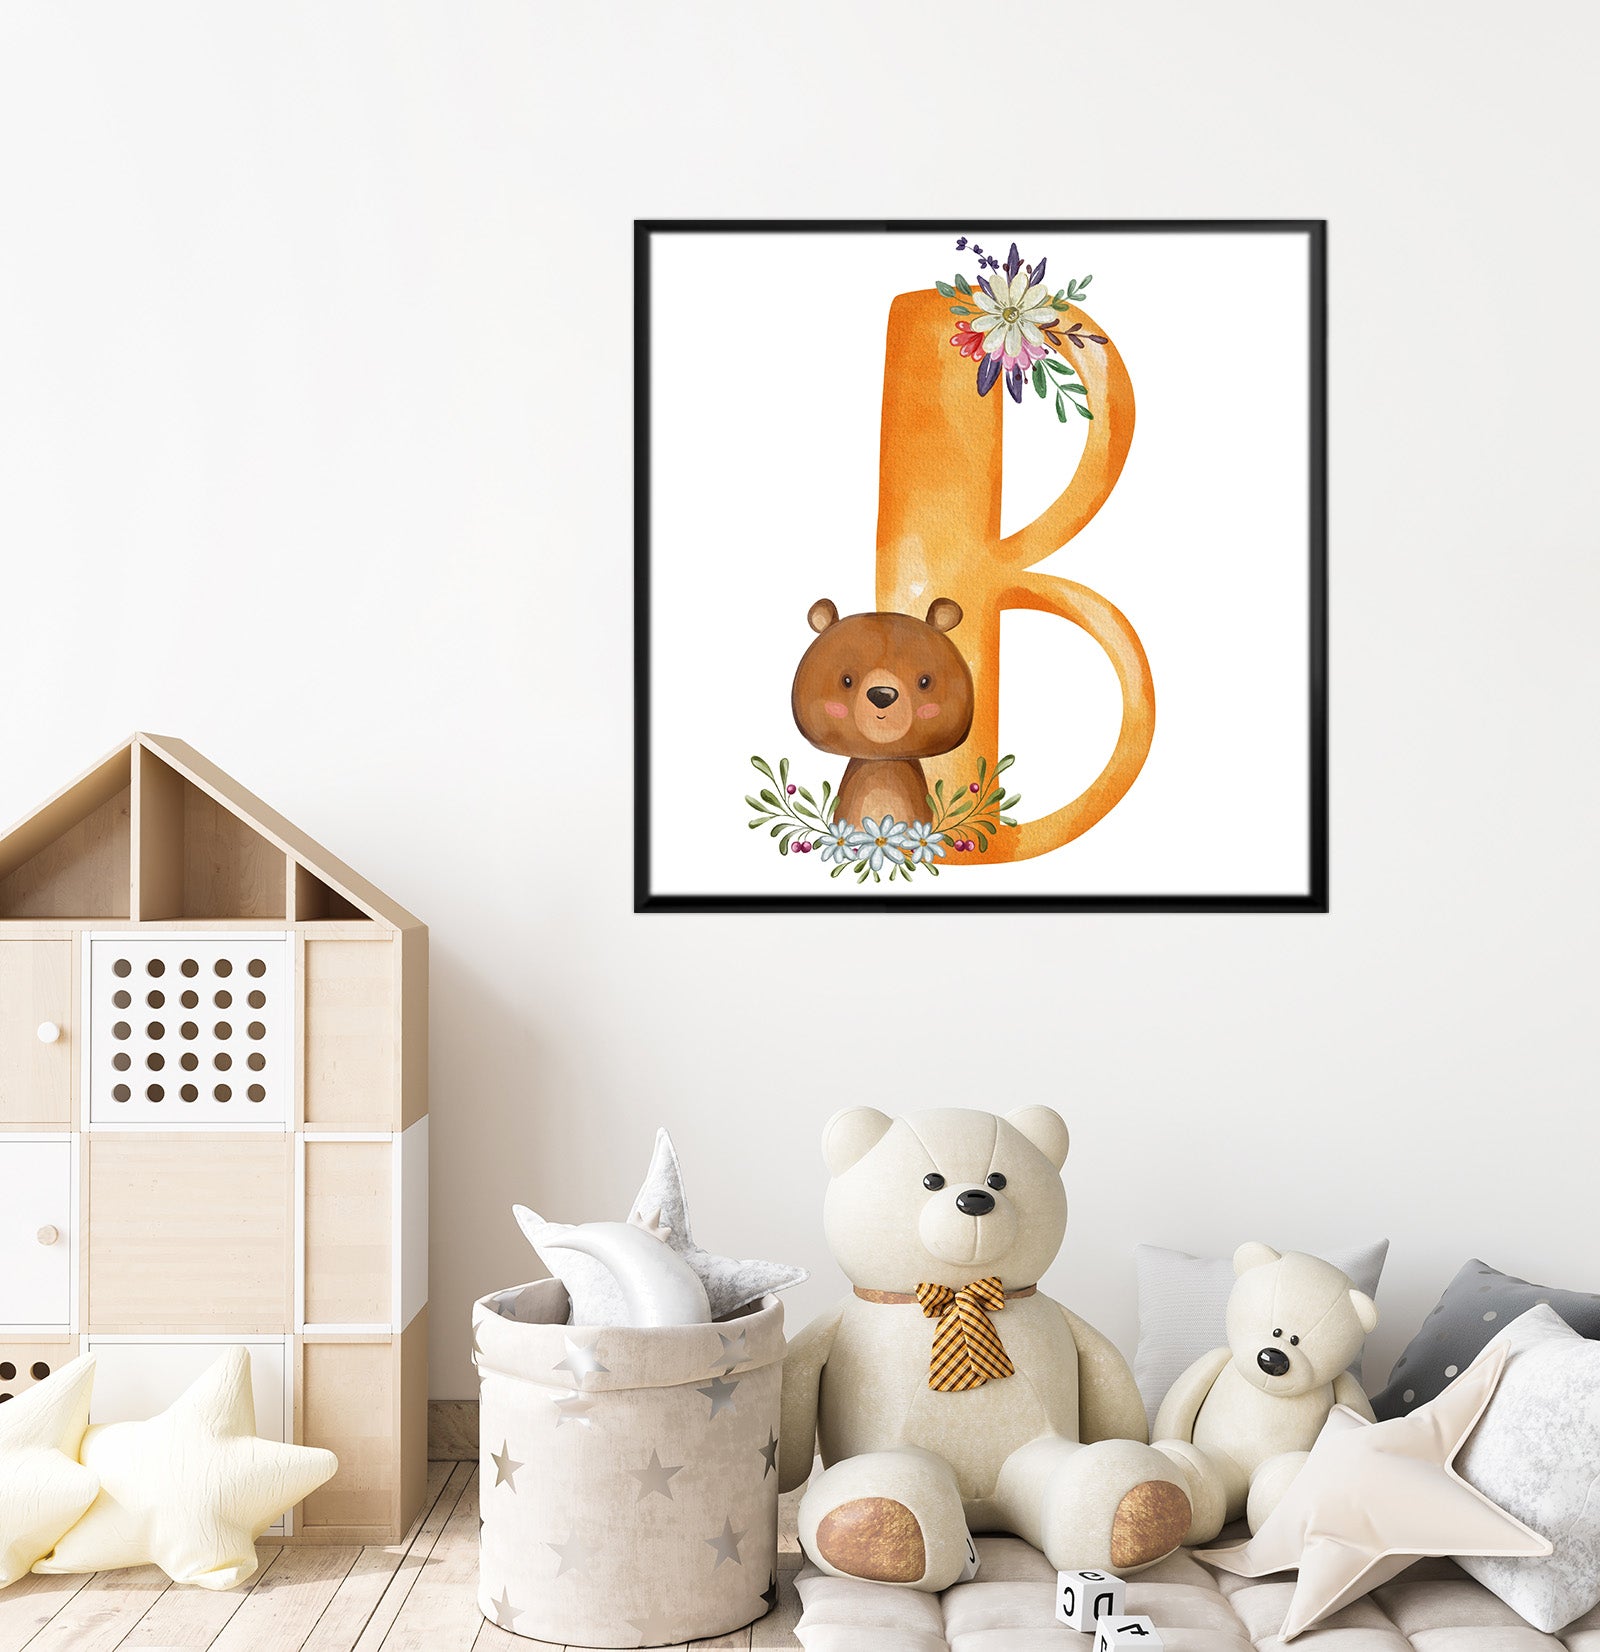 Wall Painting For Kids' Room (Letter B)